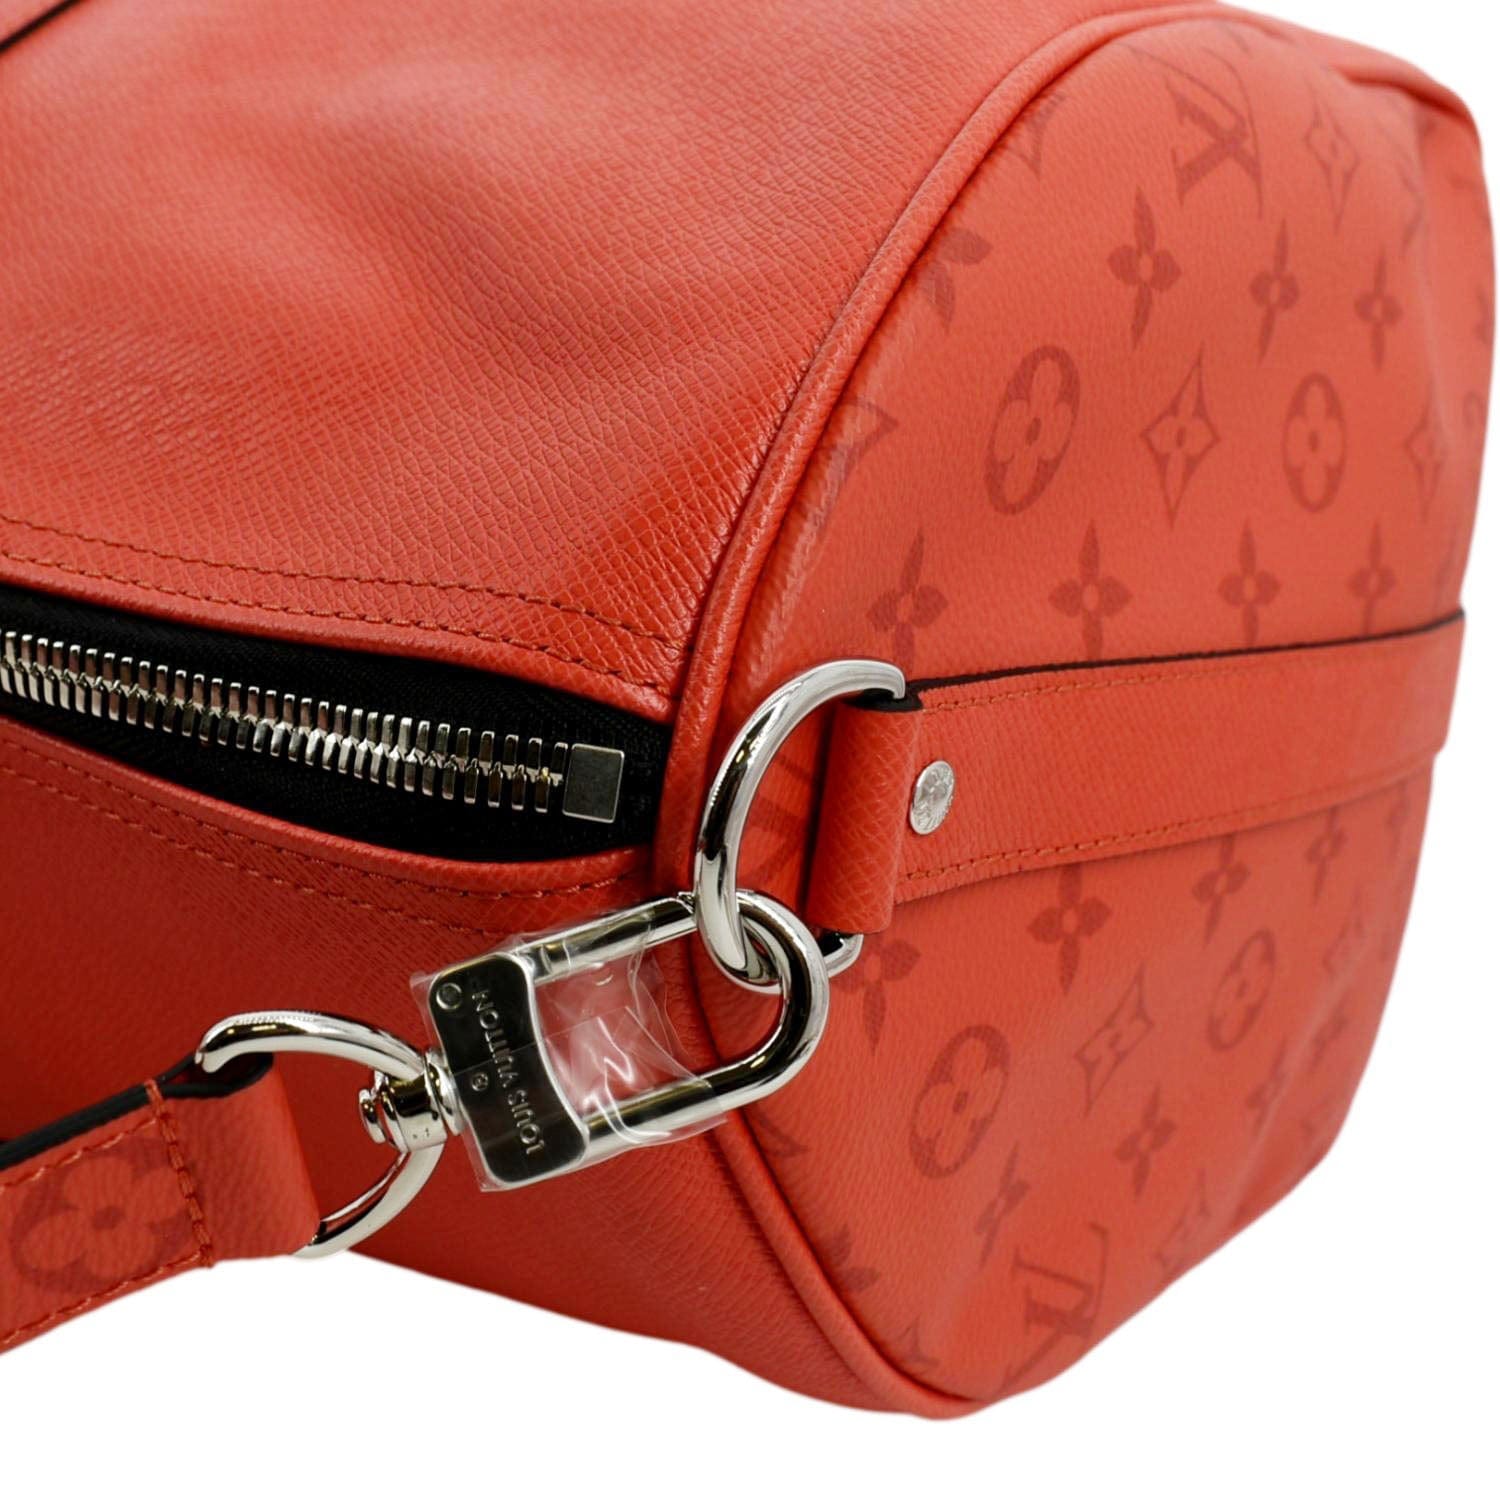 Louis Vuitton Fiery Red Taiga Leather Keepall Bandouliere 50 DuffleBag  Authentic